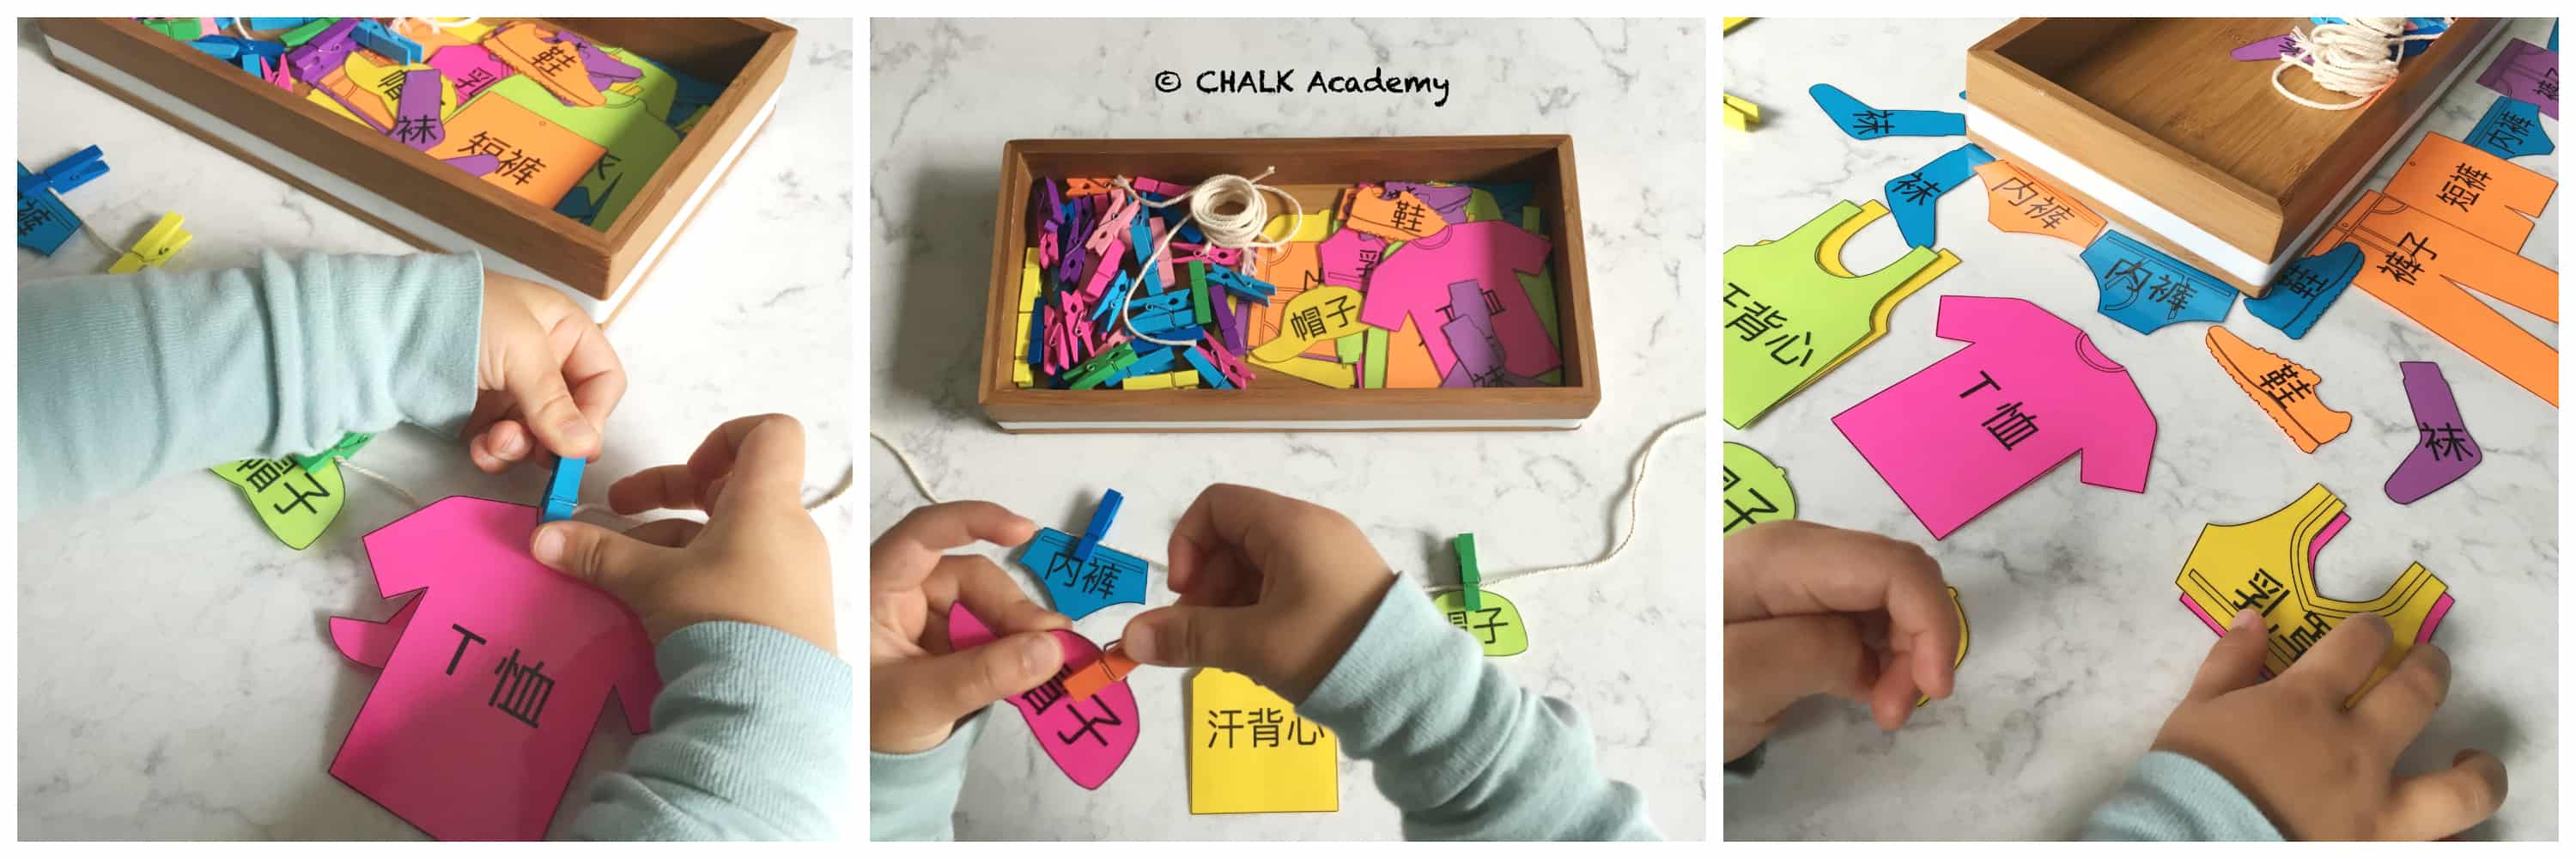 Montessori inspired Clothesline Activity with Clothing Flashcards for pretend play and fine motor practical life skills - Free Printable in Chinese, Korean, and English